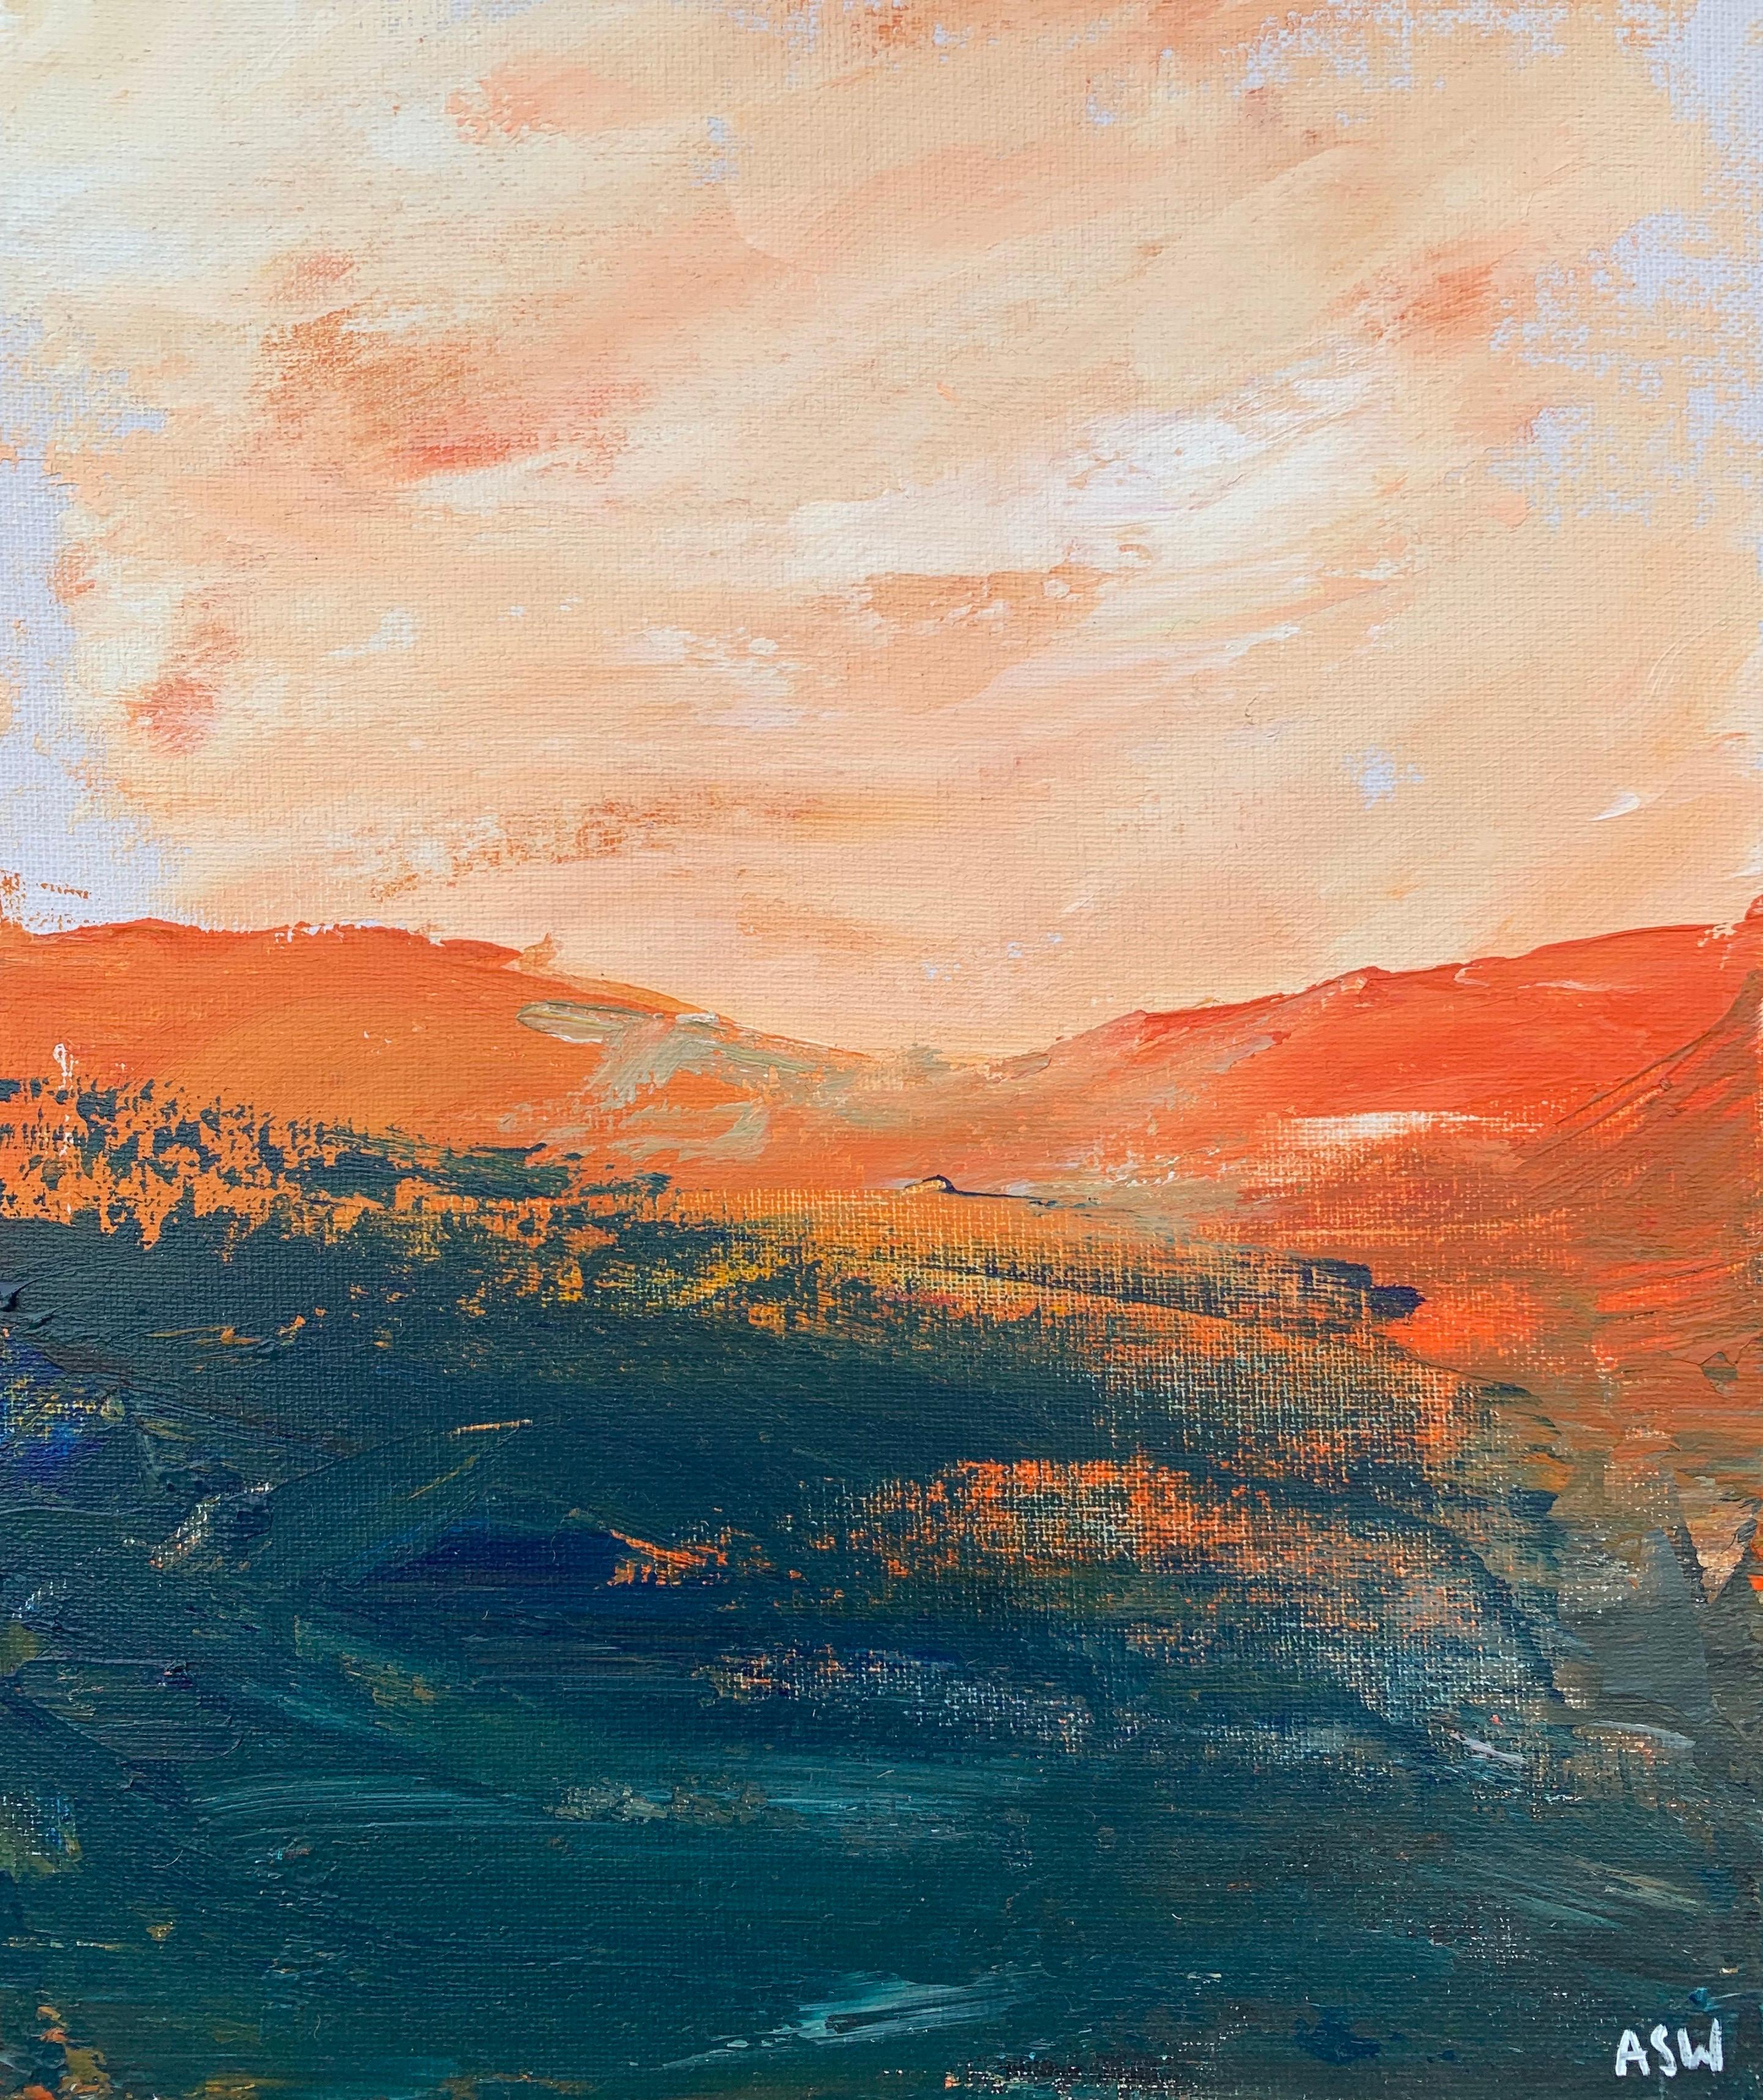 Abstract Orange & Black Mountain Landscape Study by Contemporary British Artist For Sale 3